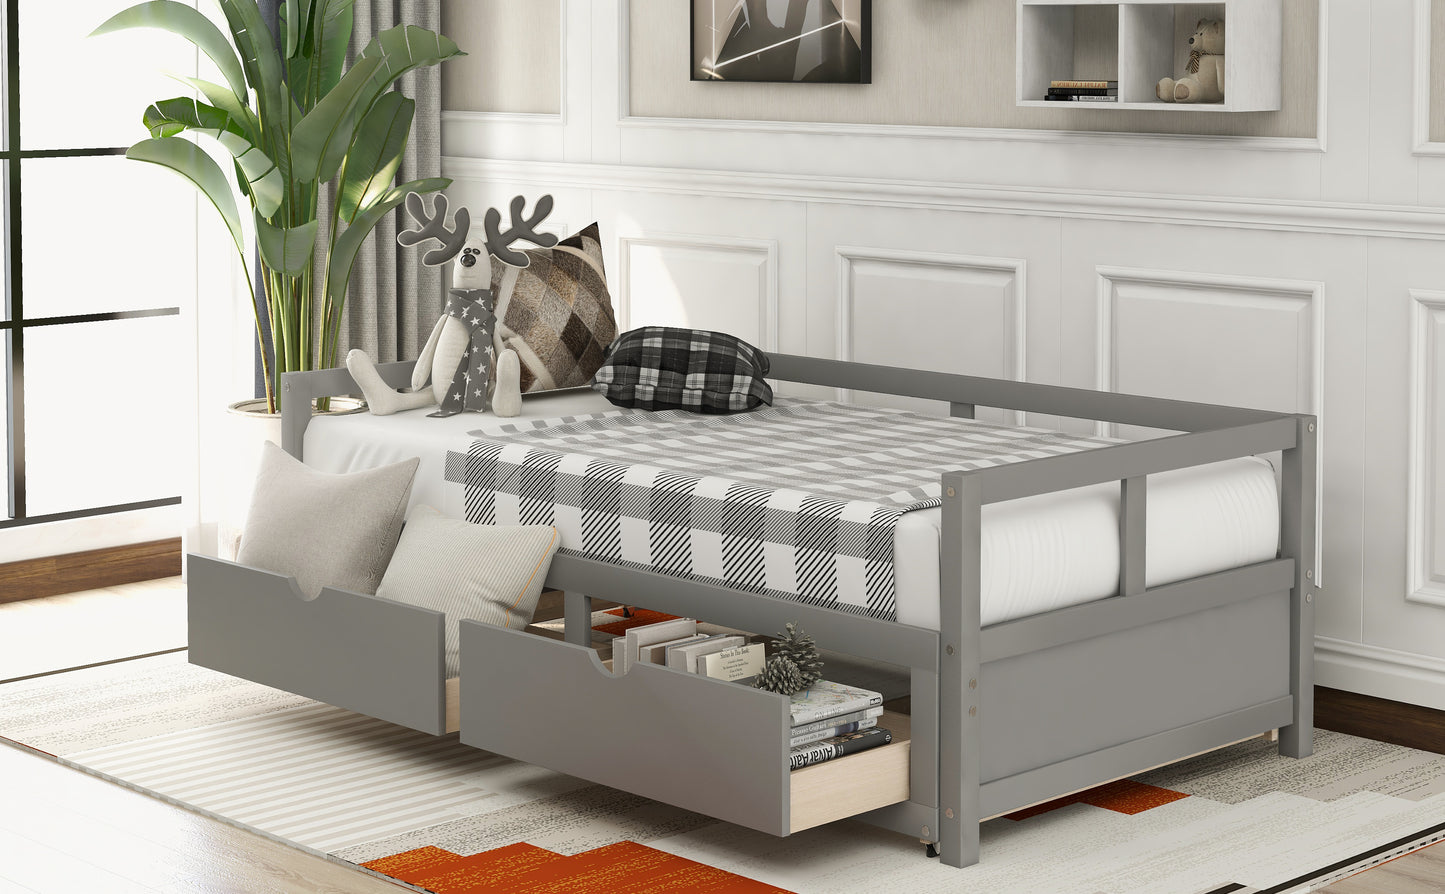 Wooden Daybed with Trundle Bed and Two Storage Drawers , Extendable Bed Daybed,Sofa Bed for Bedroom Living Room, Gray